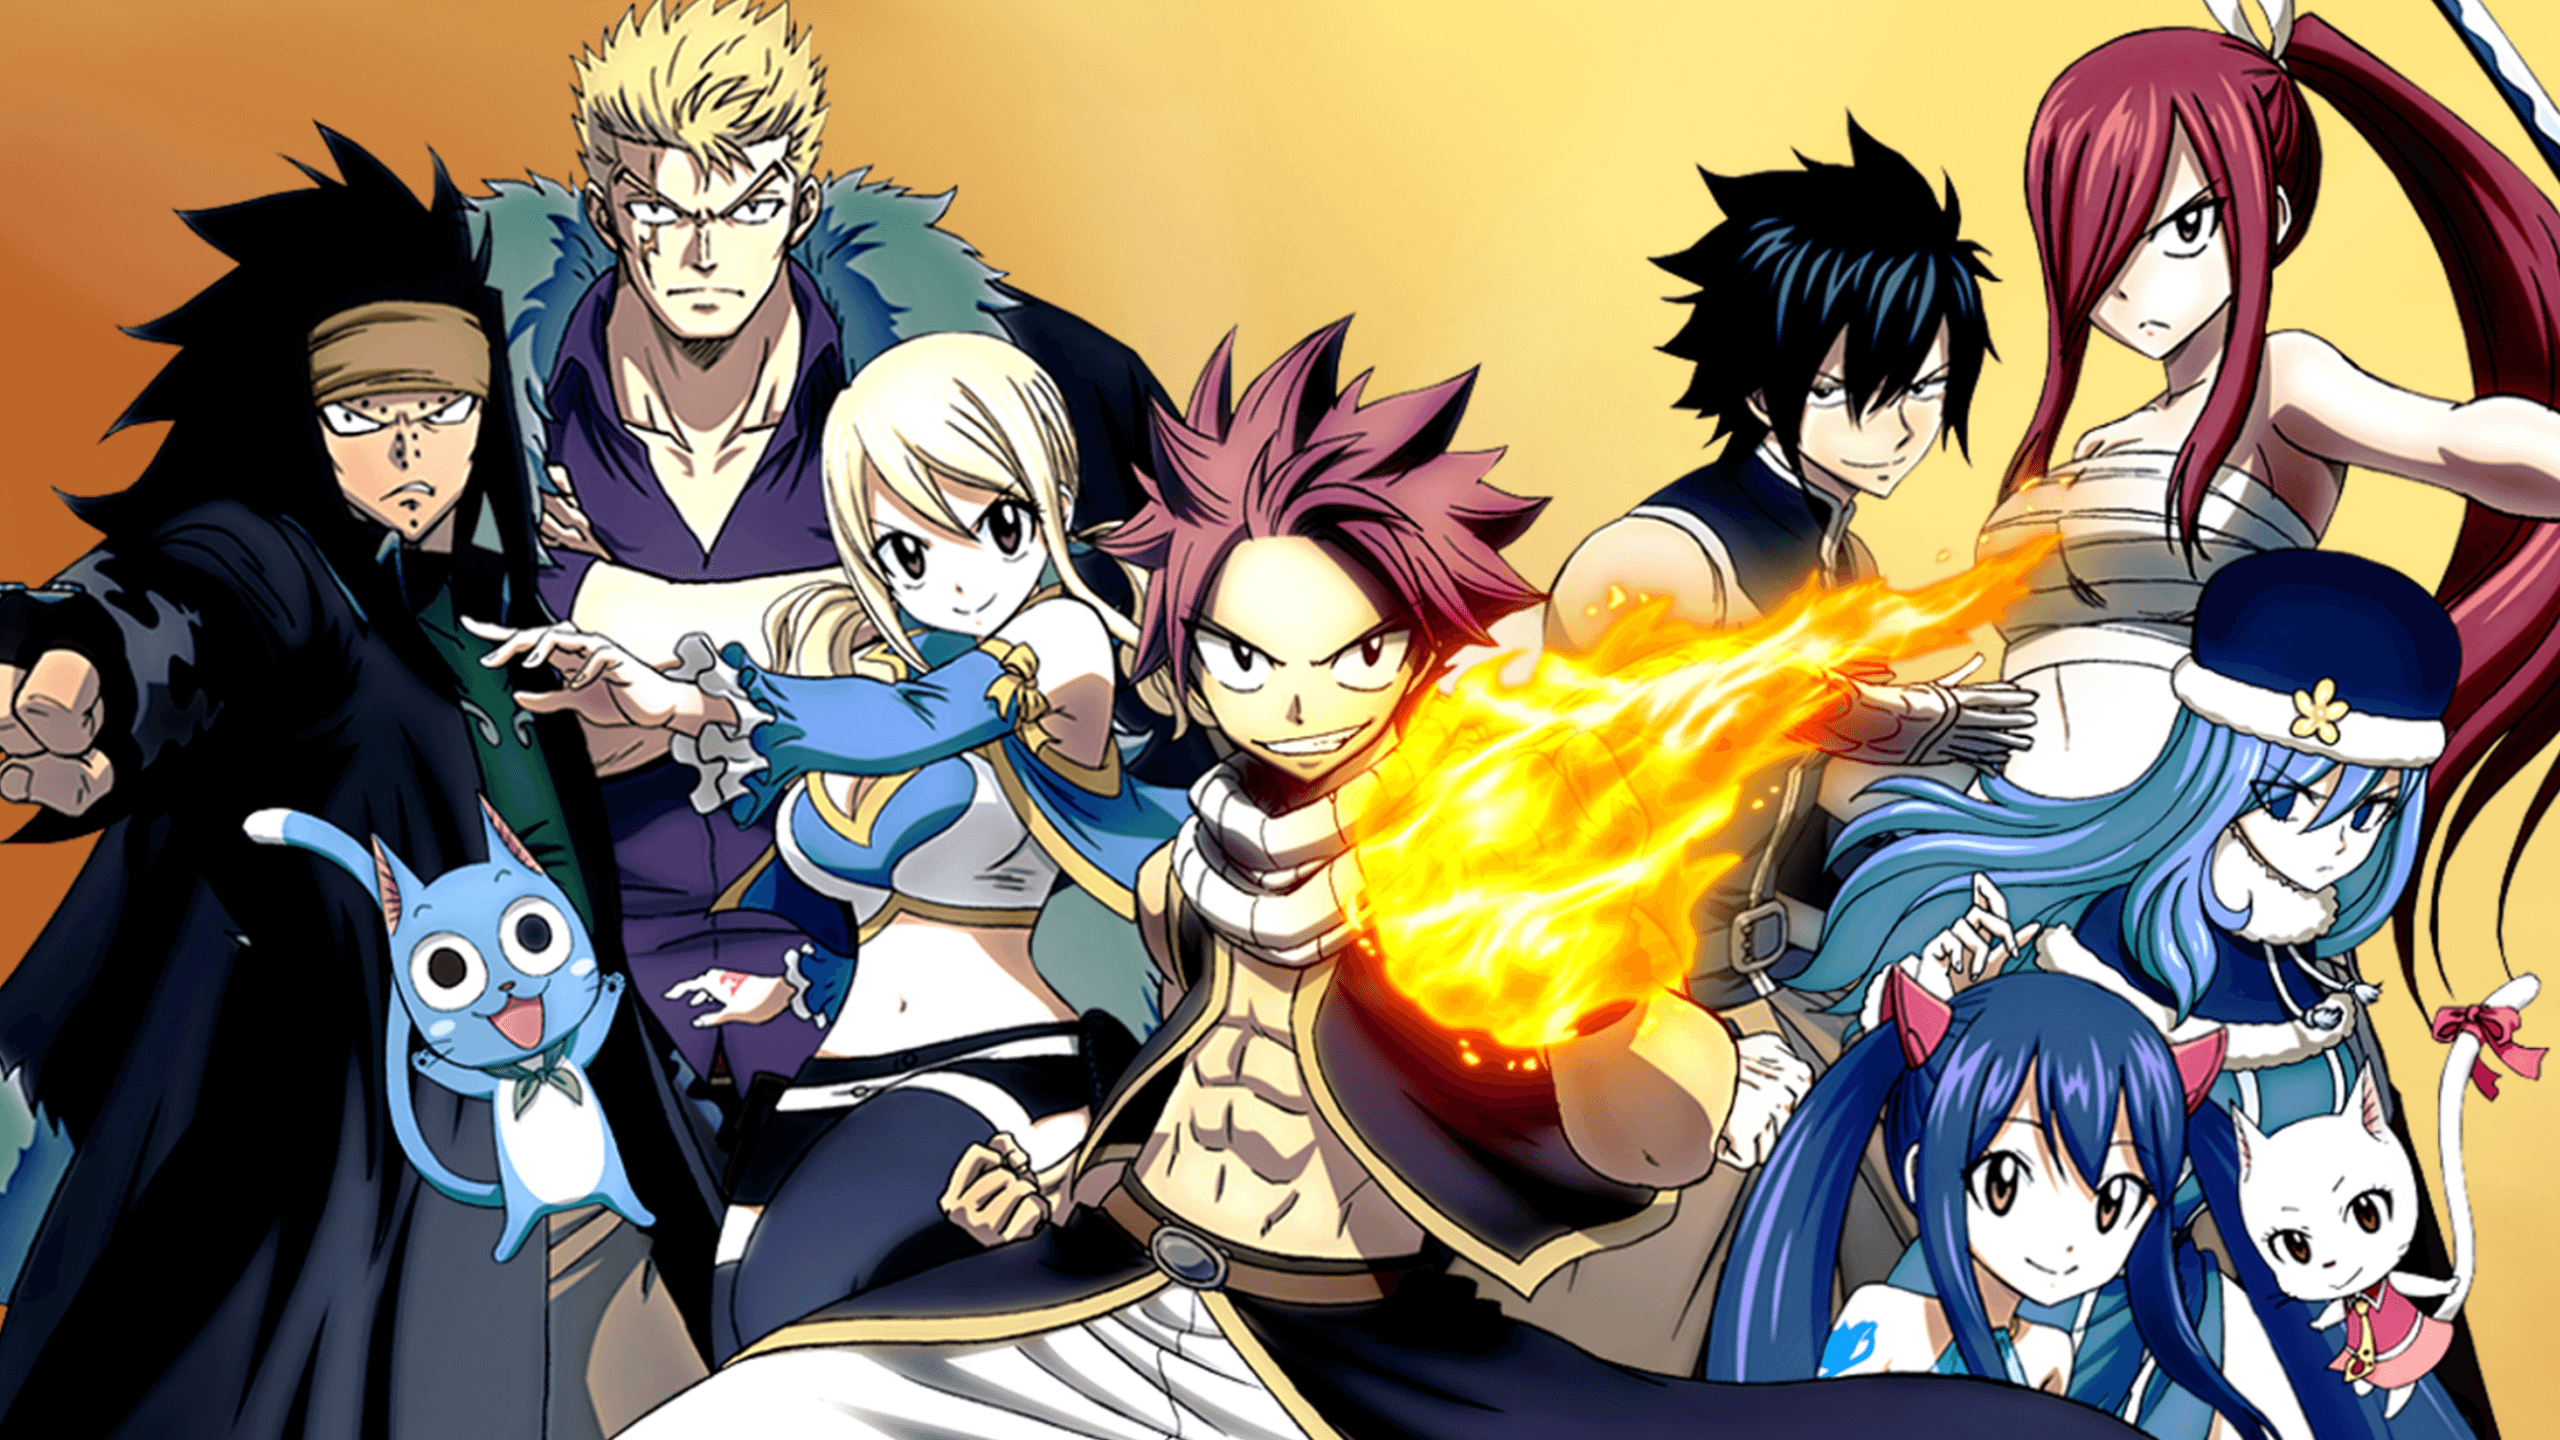 Main Characters of the anime Fairy Tail